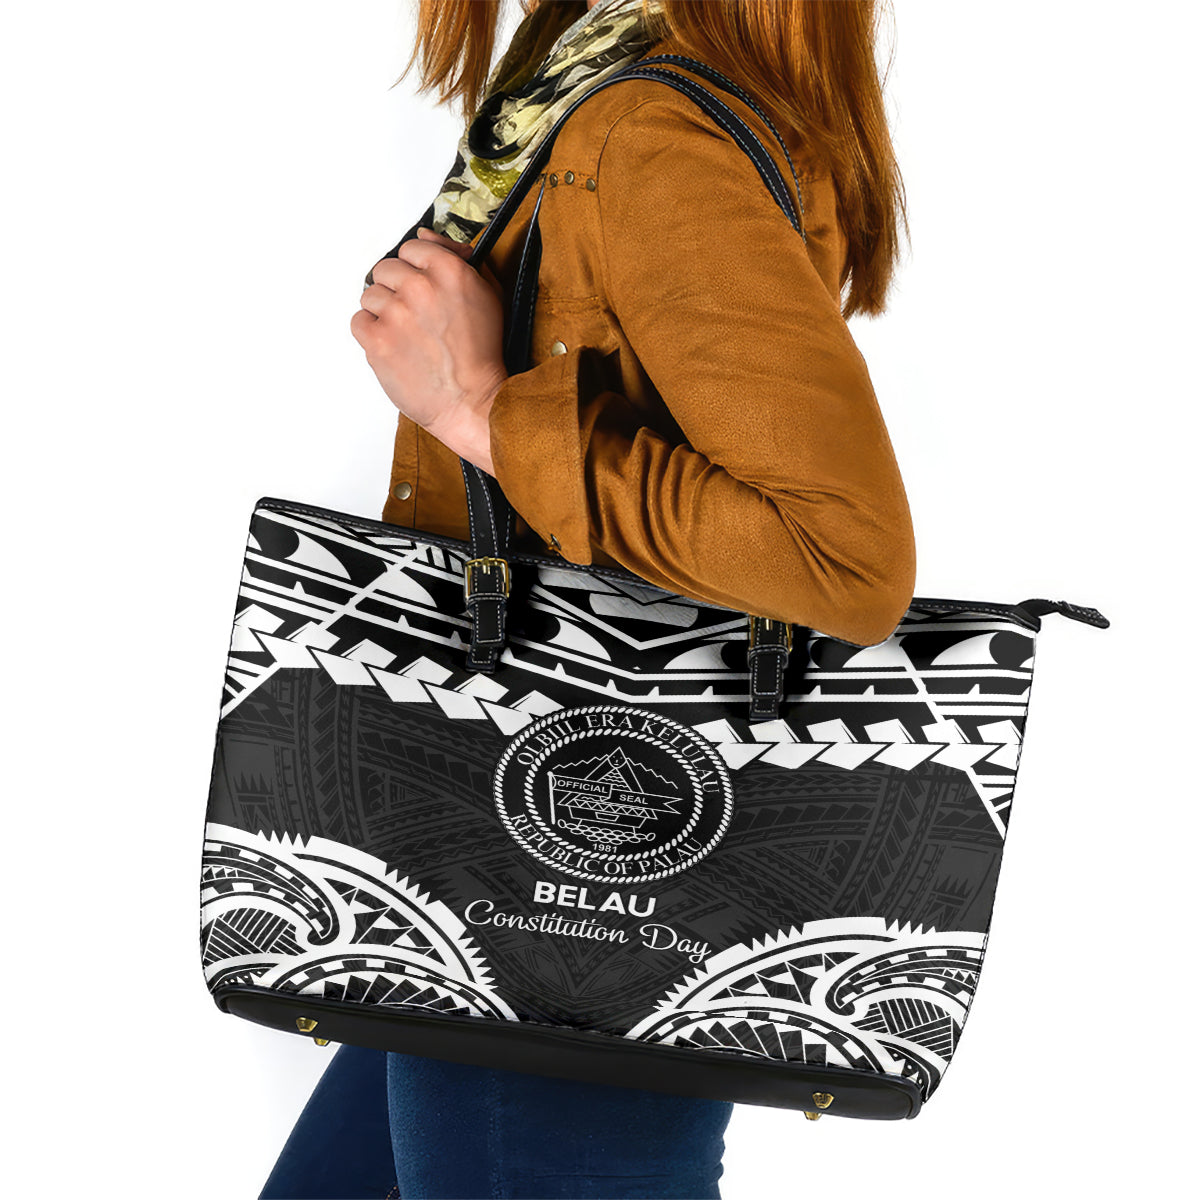 Palau Constitution Day Leather Tote Bag Belau Seal With Polynesian Pattern - Black